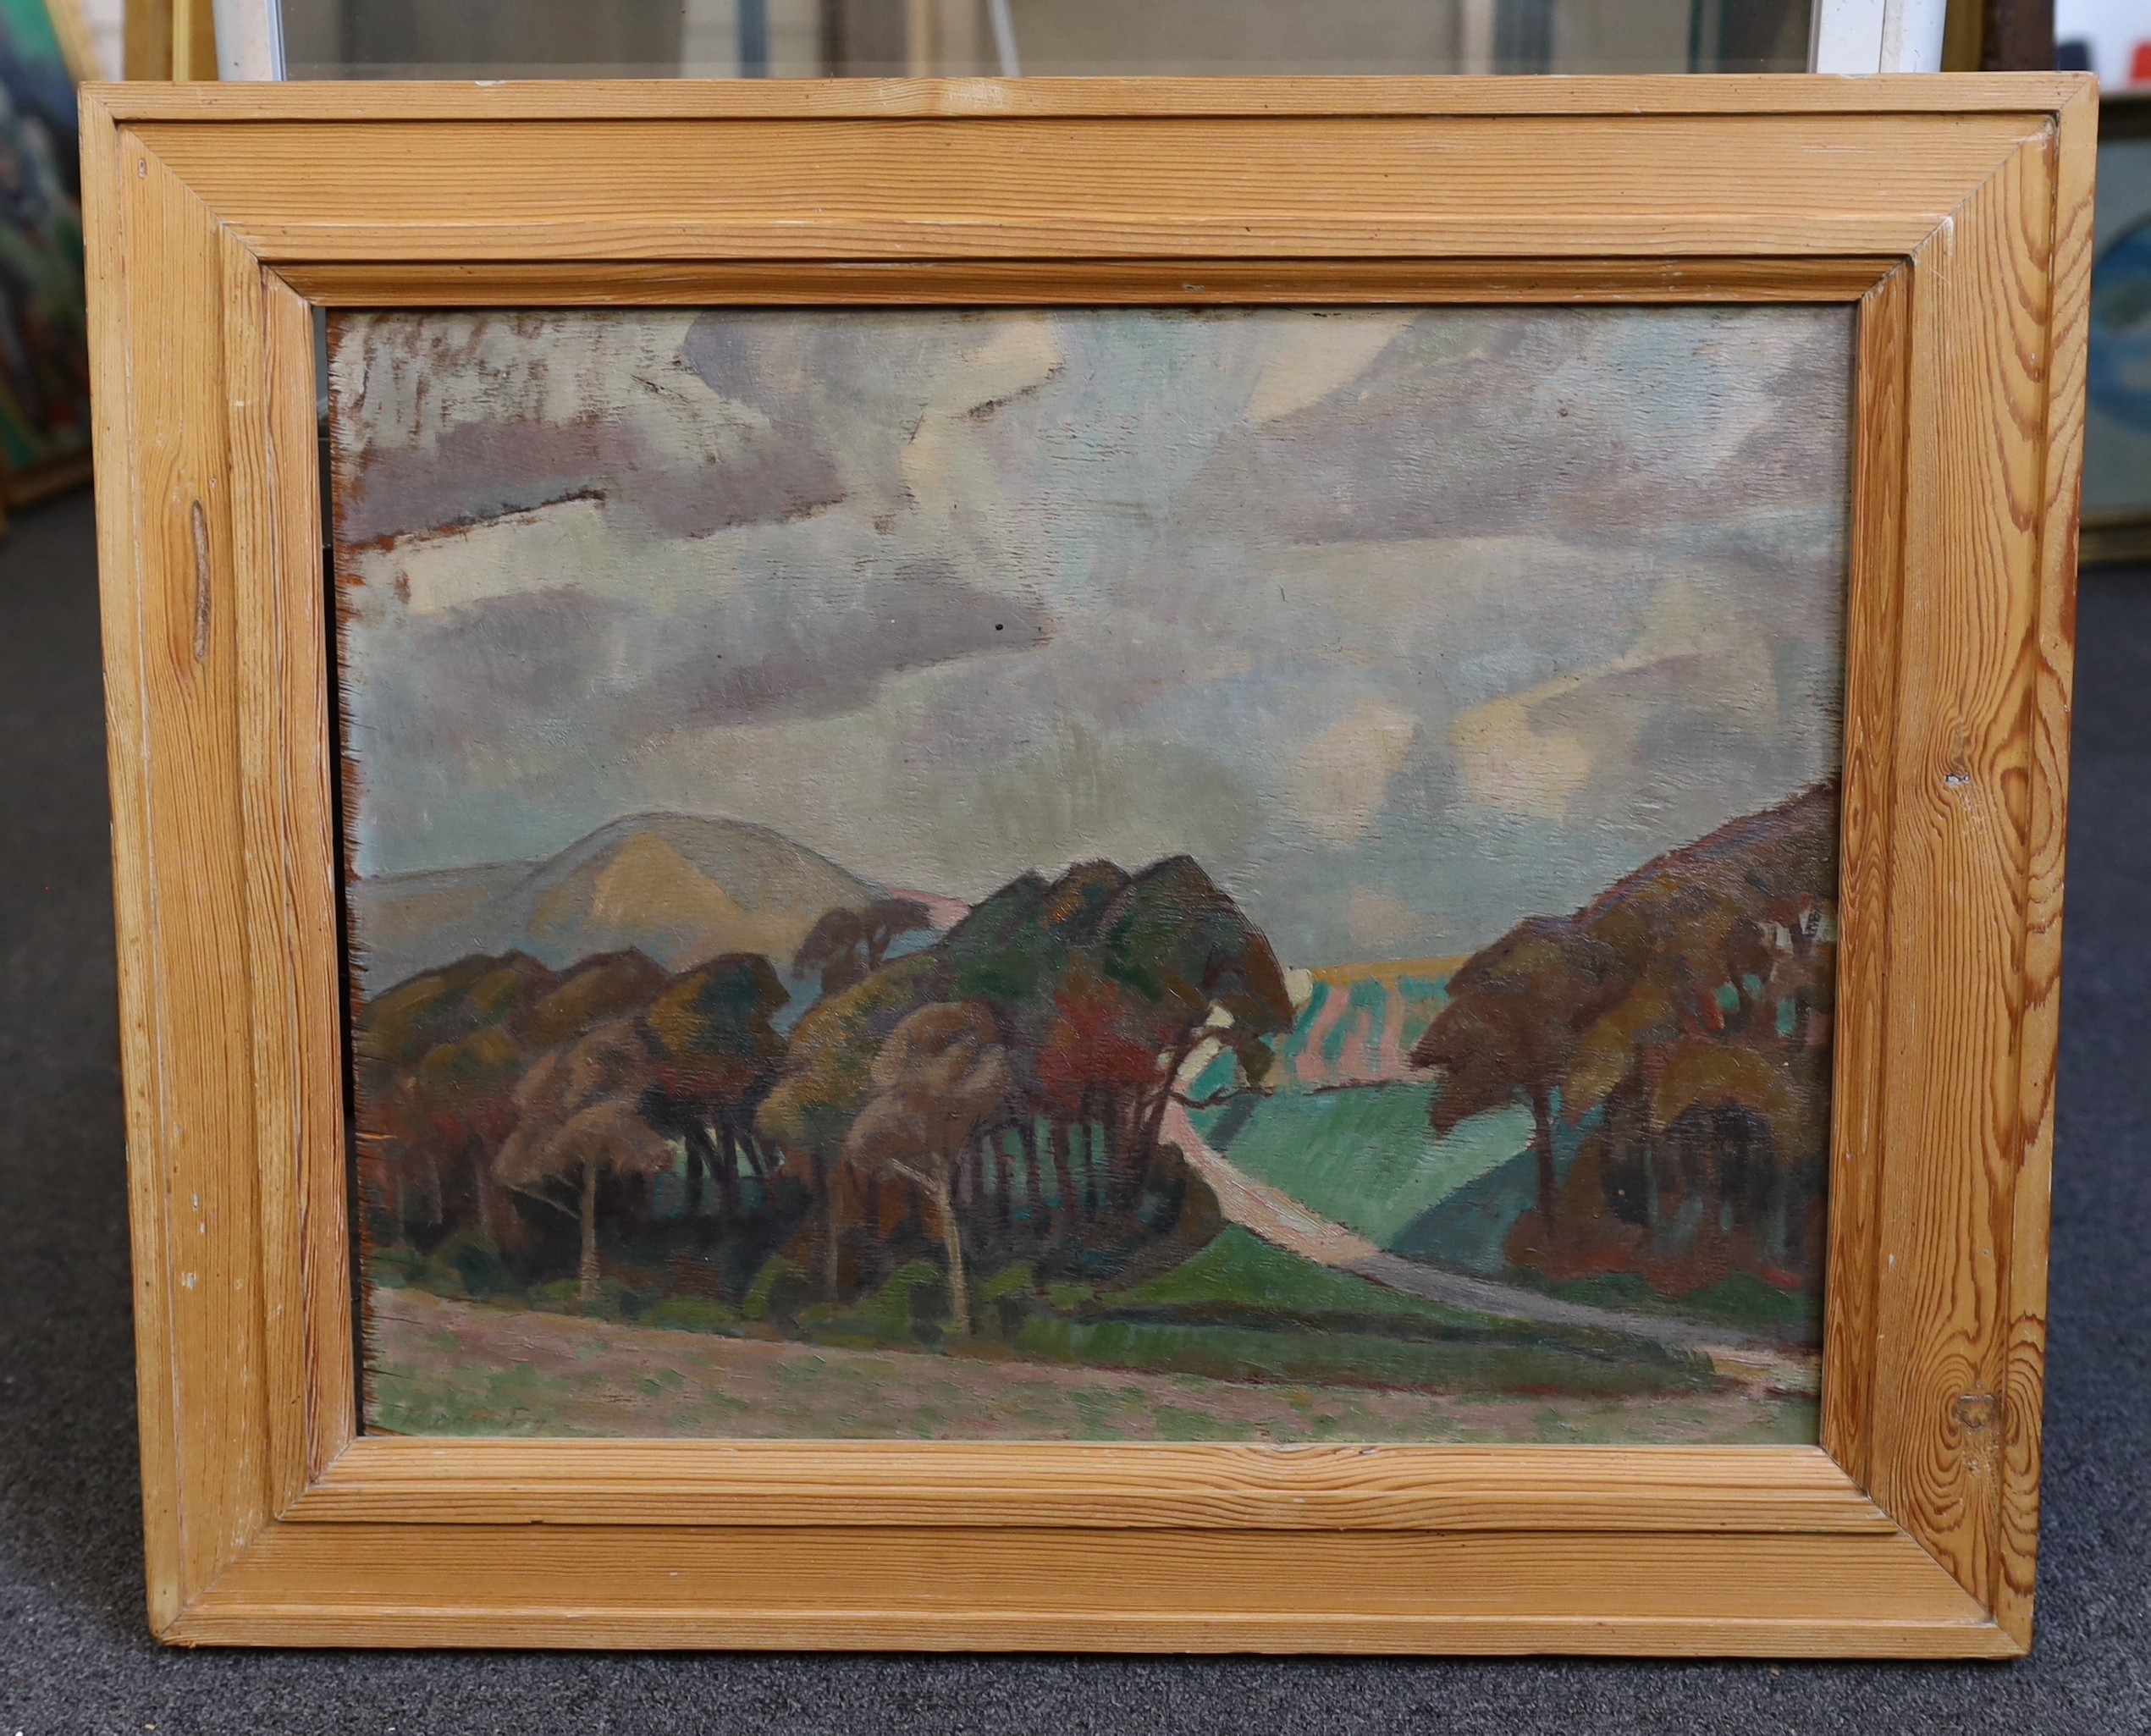 Roger Fry N.E.A.C. (British, 1866-1934), 'The Downs near Guildford', oil on wooden panel, 40 x 52cm